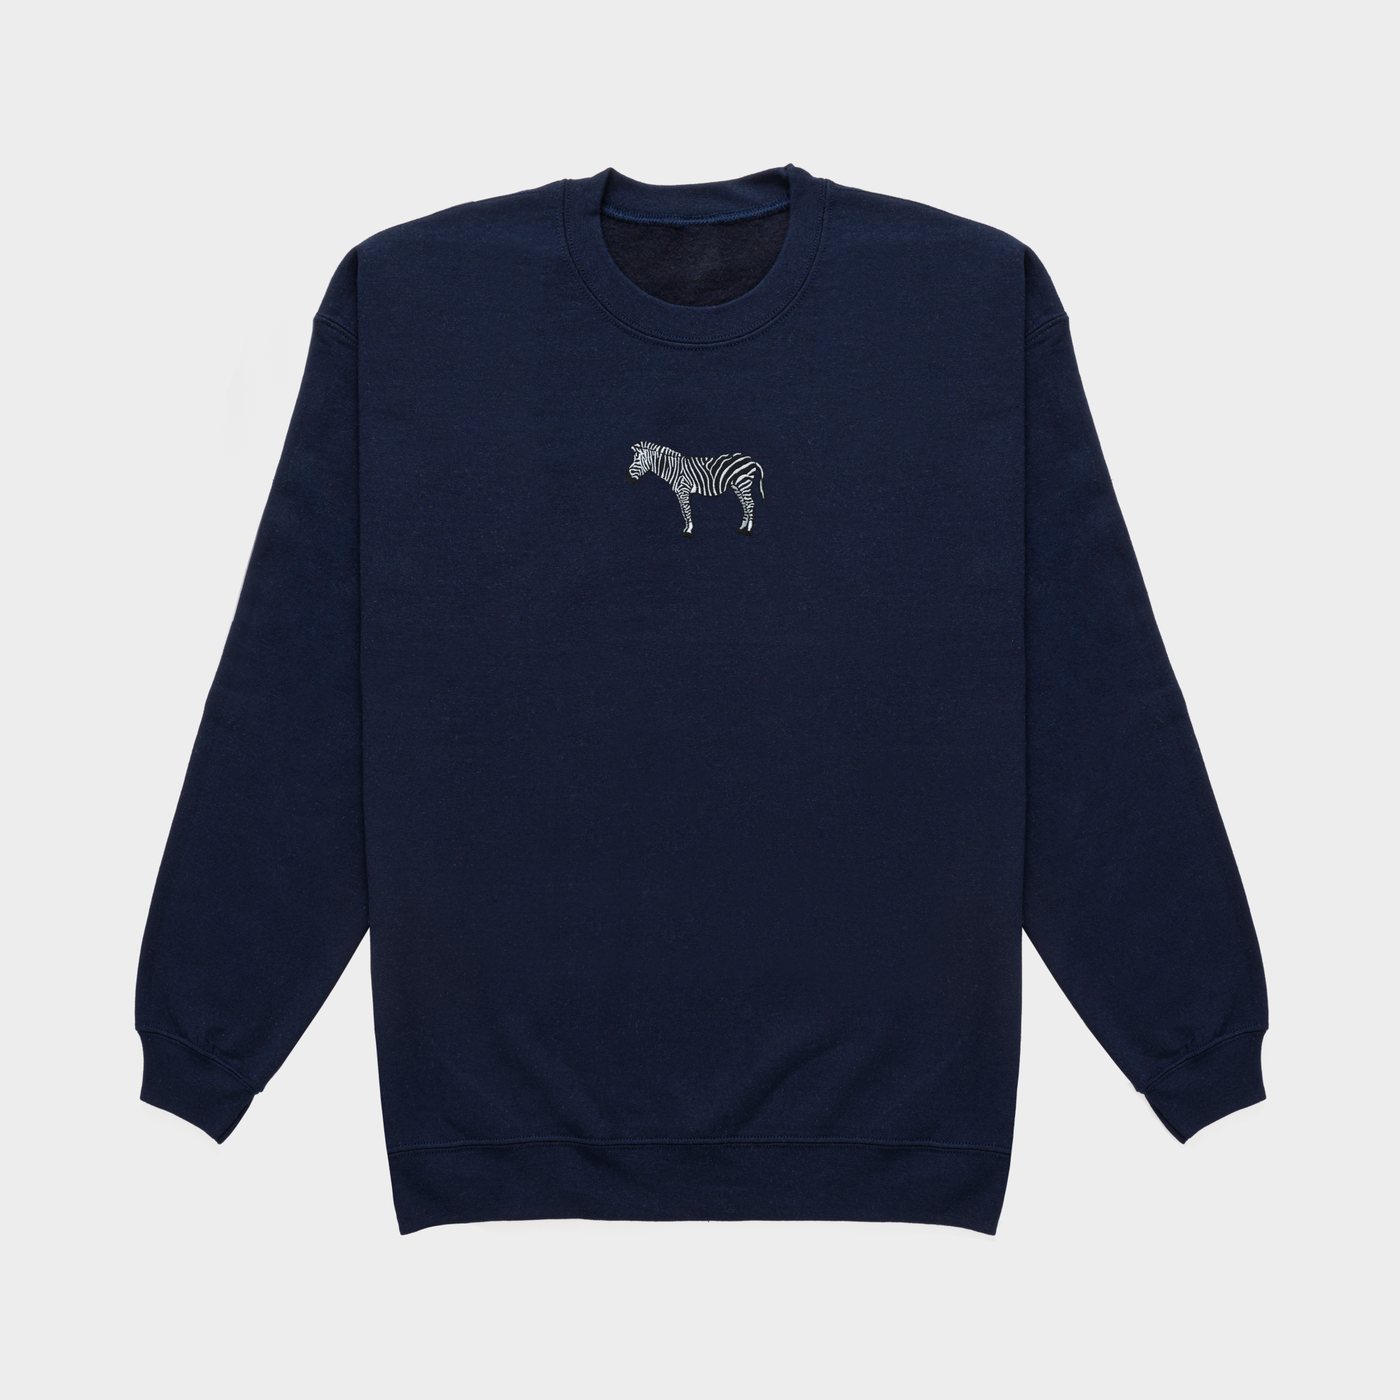 Bobby's Planet Women's Embroidered Zebra Sweatshirt from African Animals Collection in Navy Color#color_navy